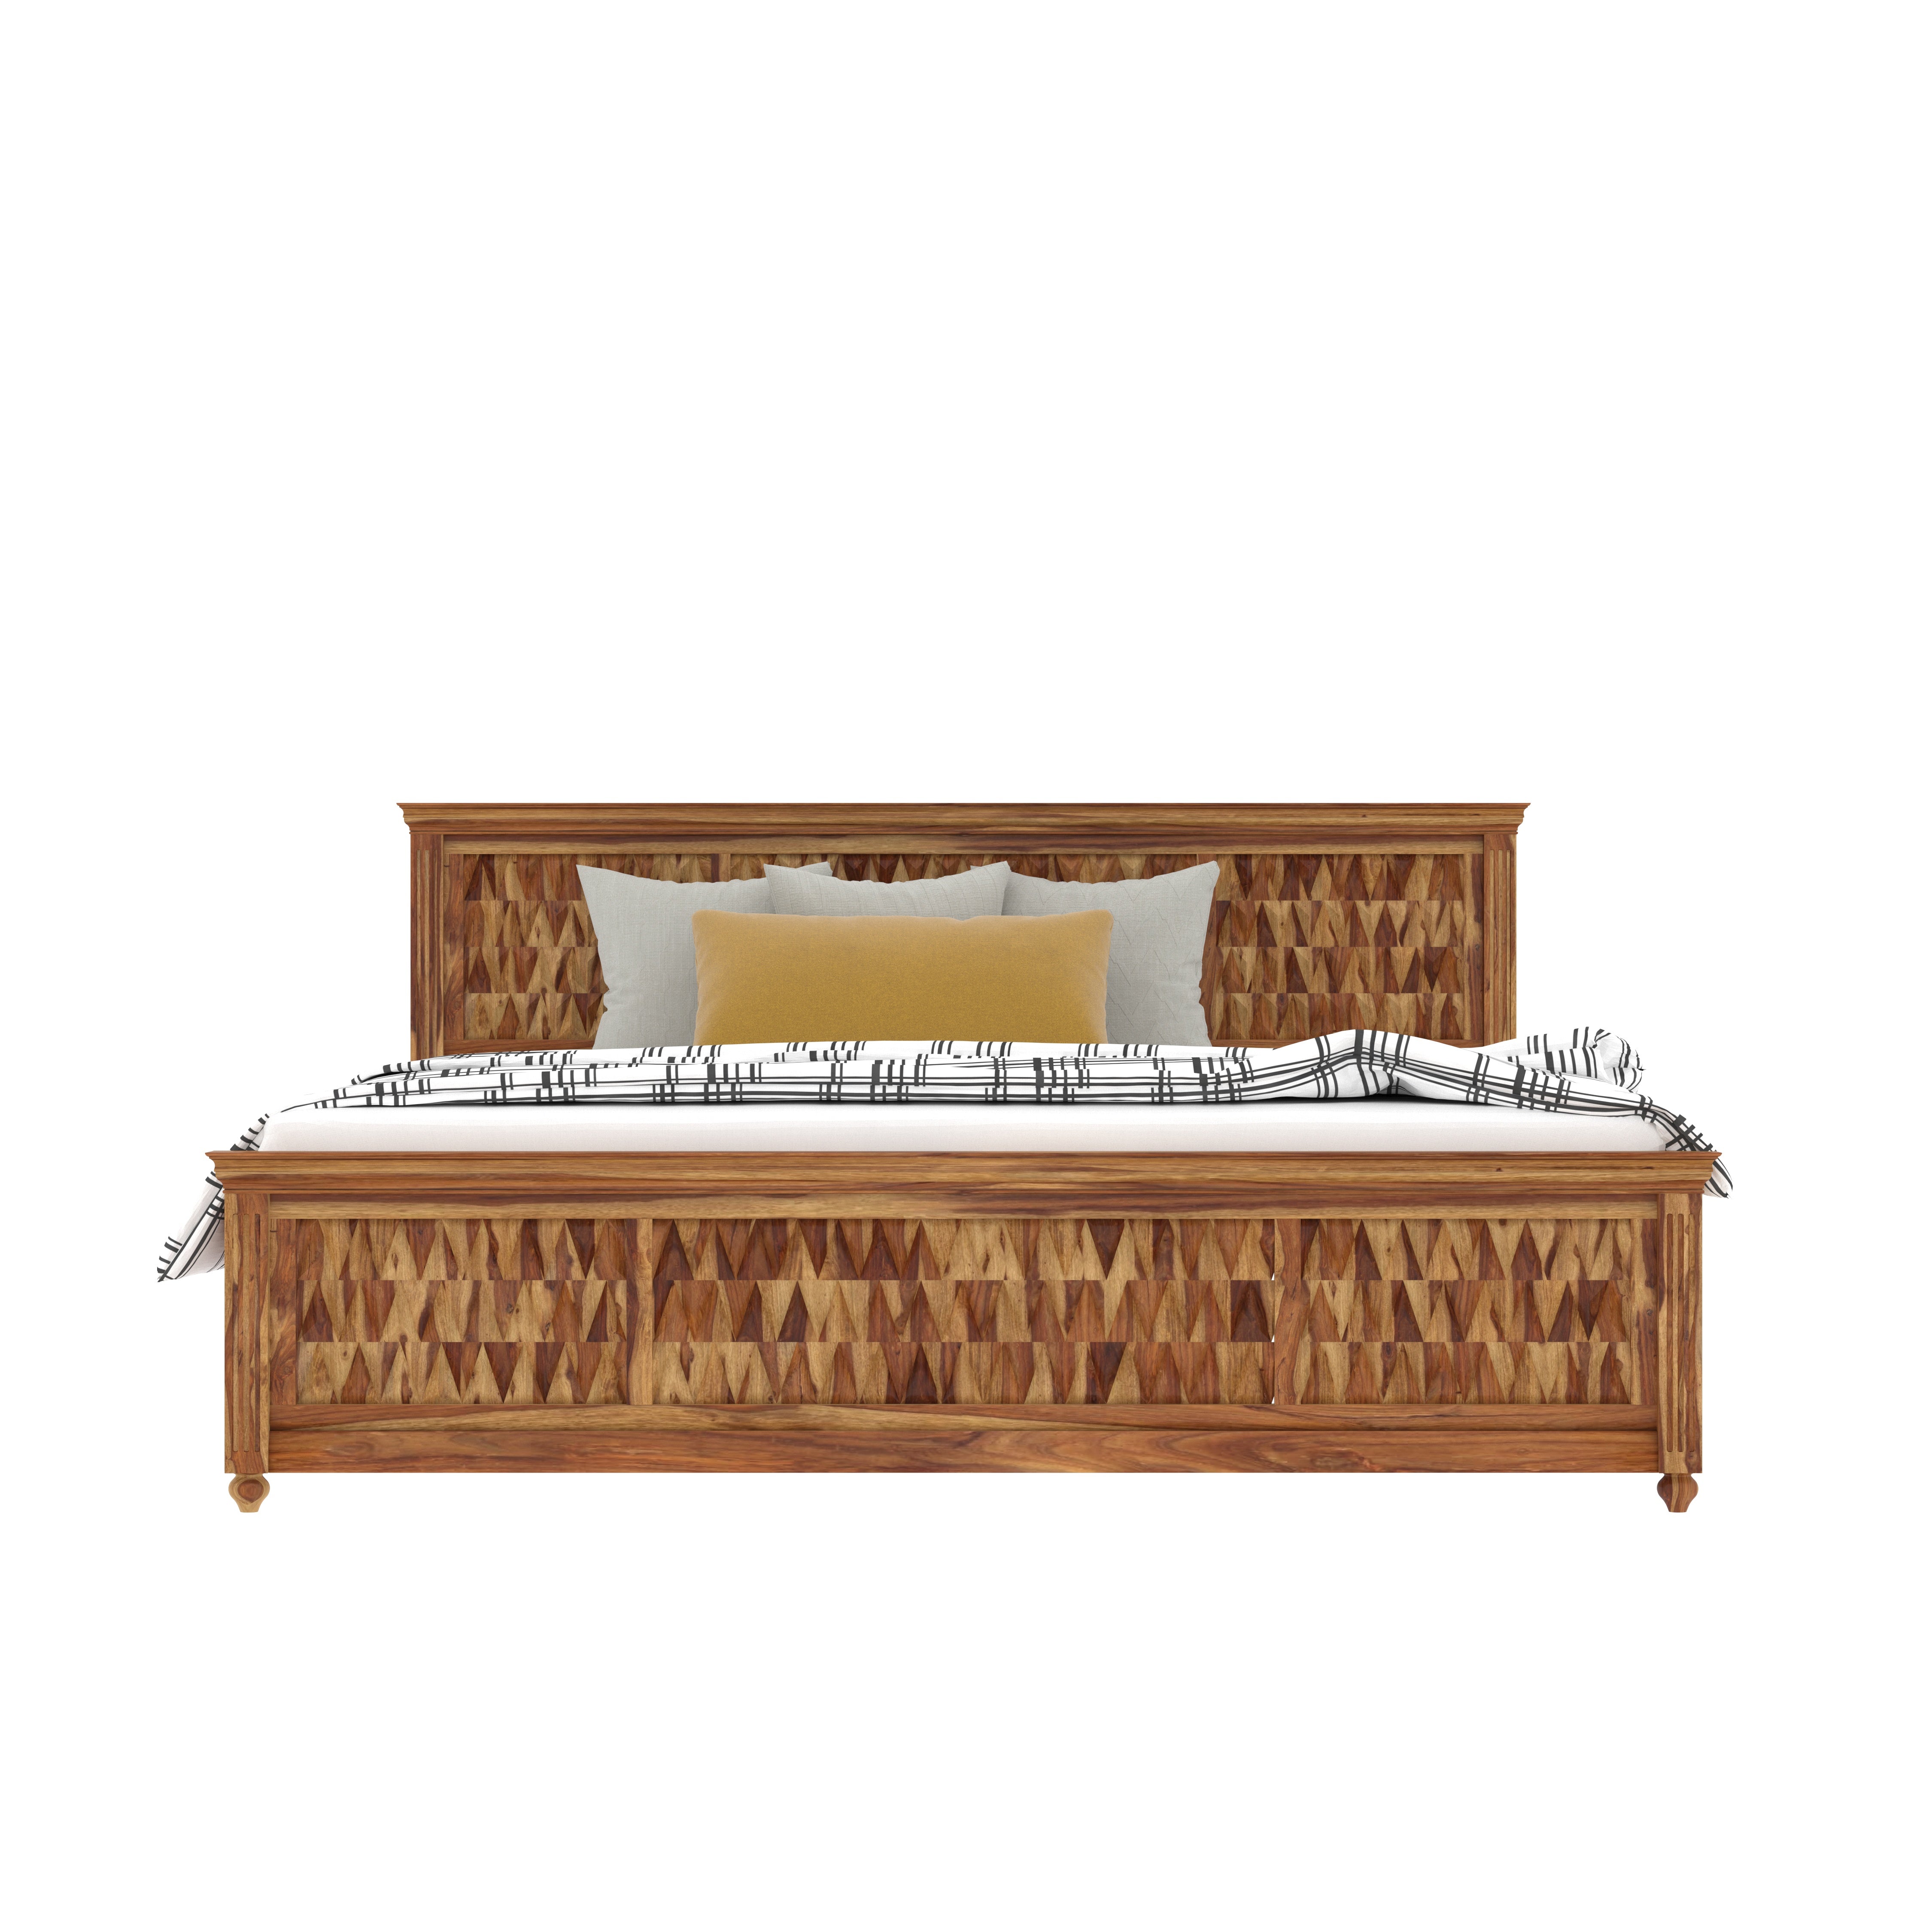 Richard Quality Finished Wooden Handmade Wooden Bed Bed